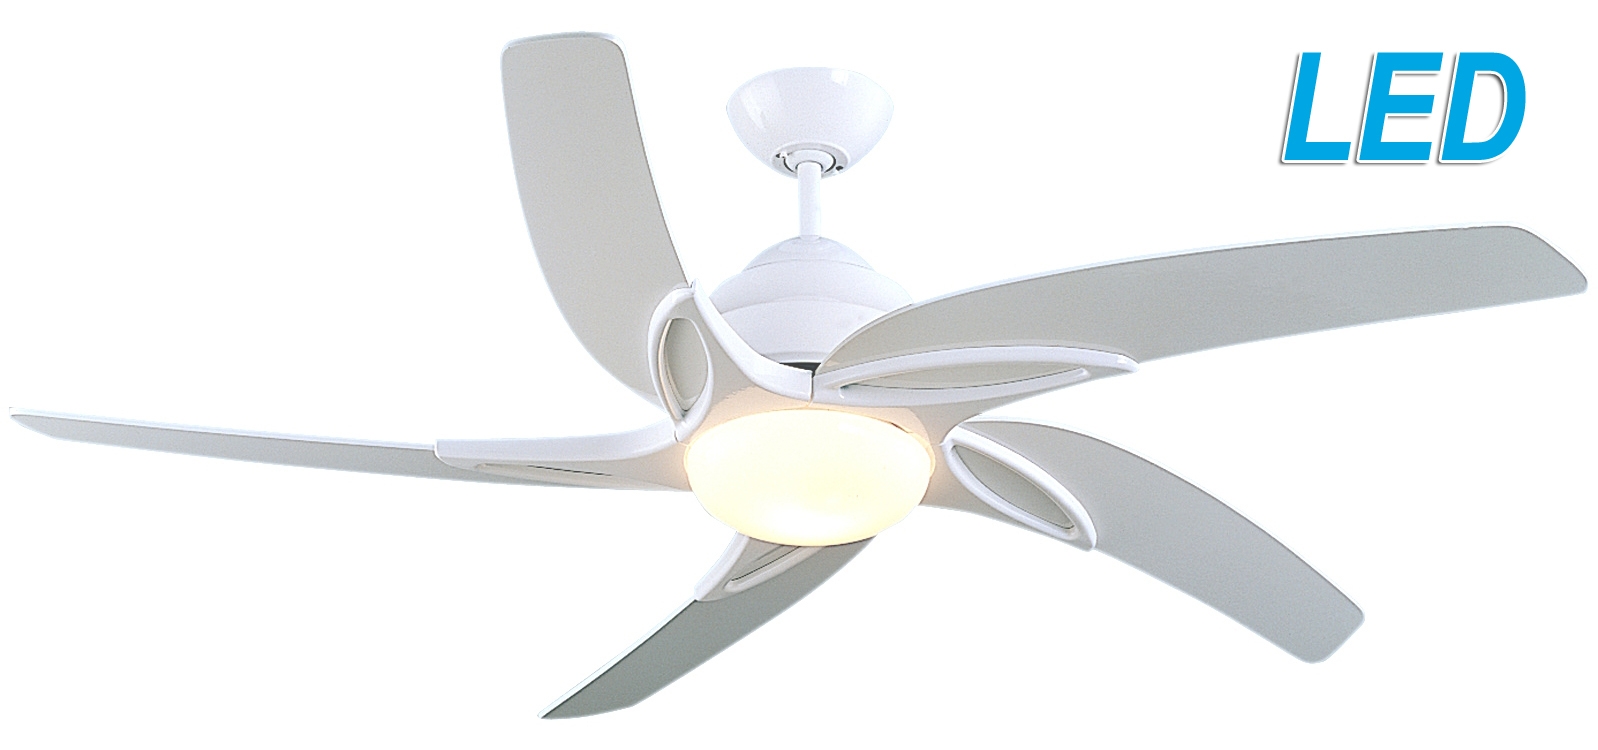 Permalink to Ceiling Fan With Led Light And Remote Control